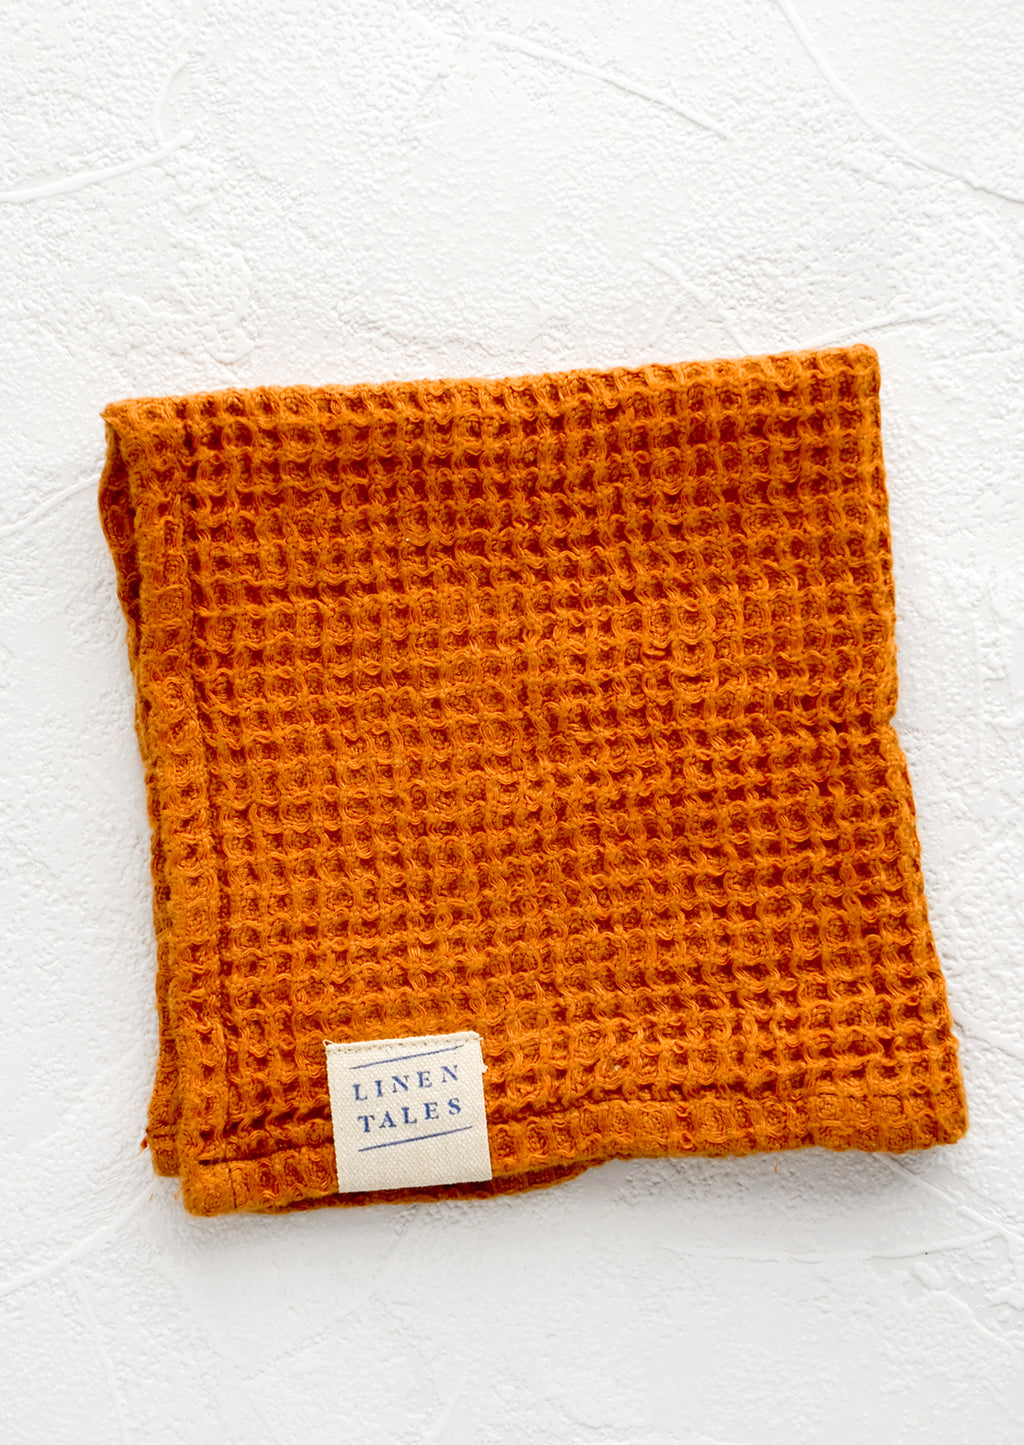 Terracotta: A folded waffle-weave linen washcloth in terracotta color with a logo patch.